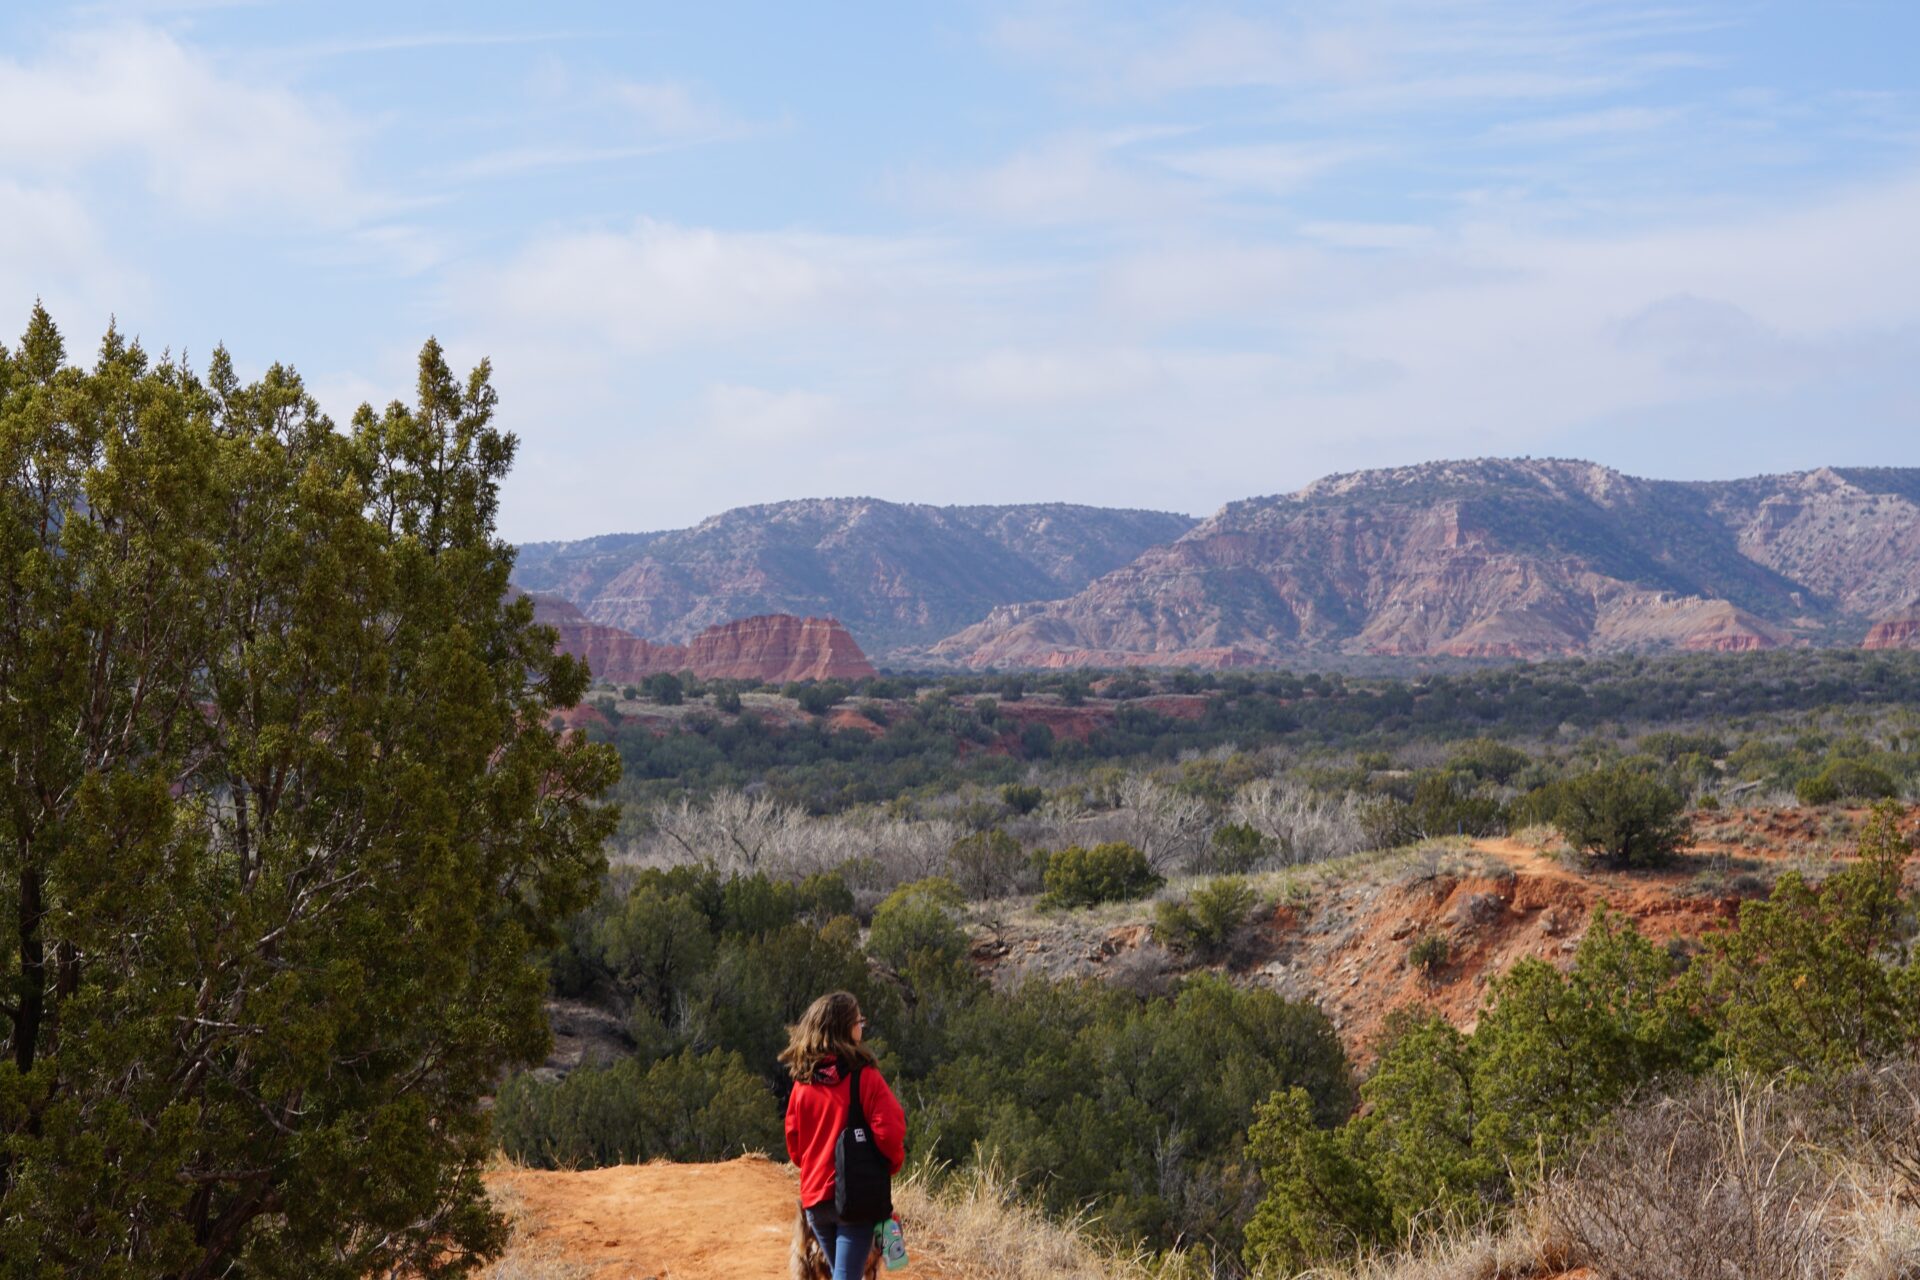 Texas State Parks with Cabins - Palo Duro Canyon State Park